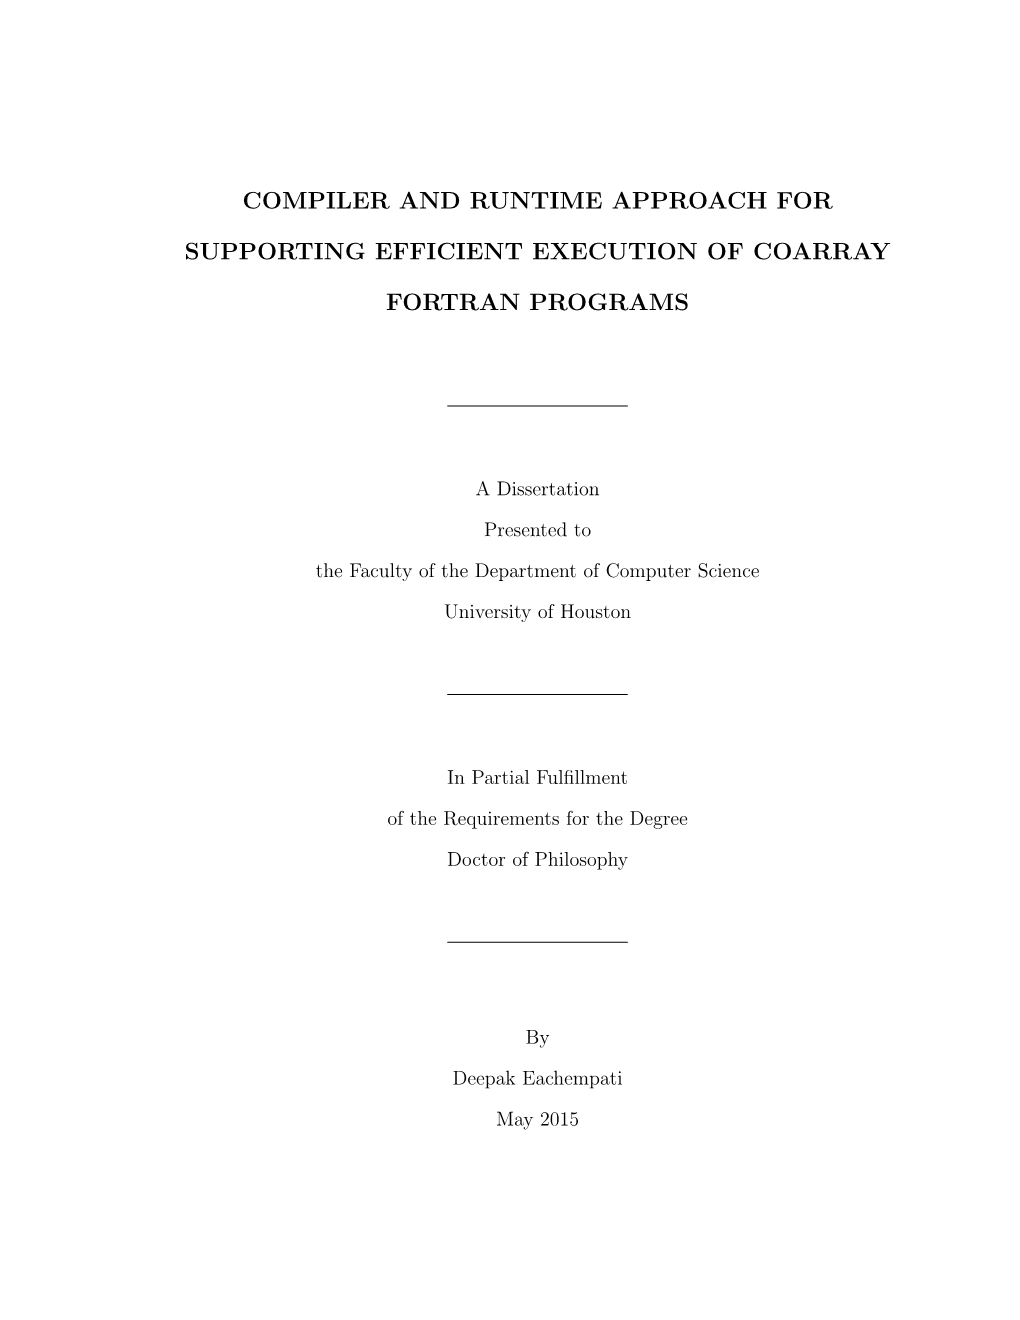 Compiler and Runtime Approach for Supporting Efficient Execution of Coarray Fortran Programs